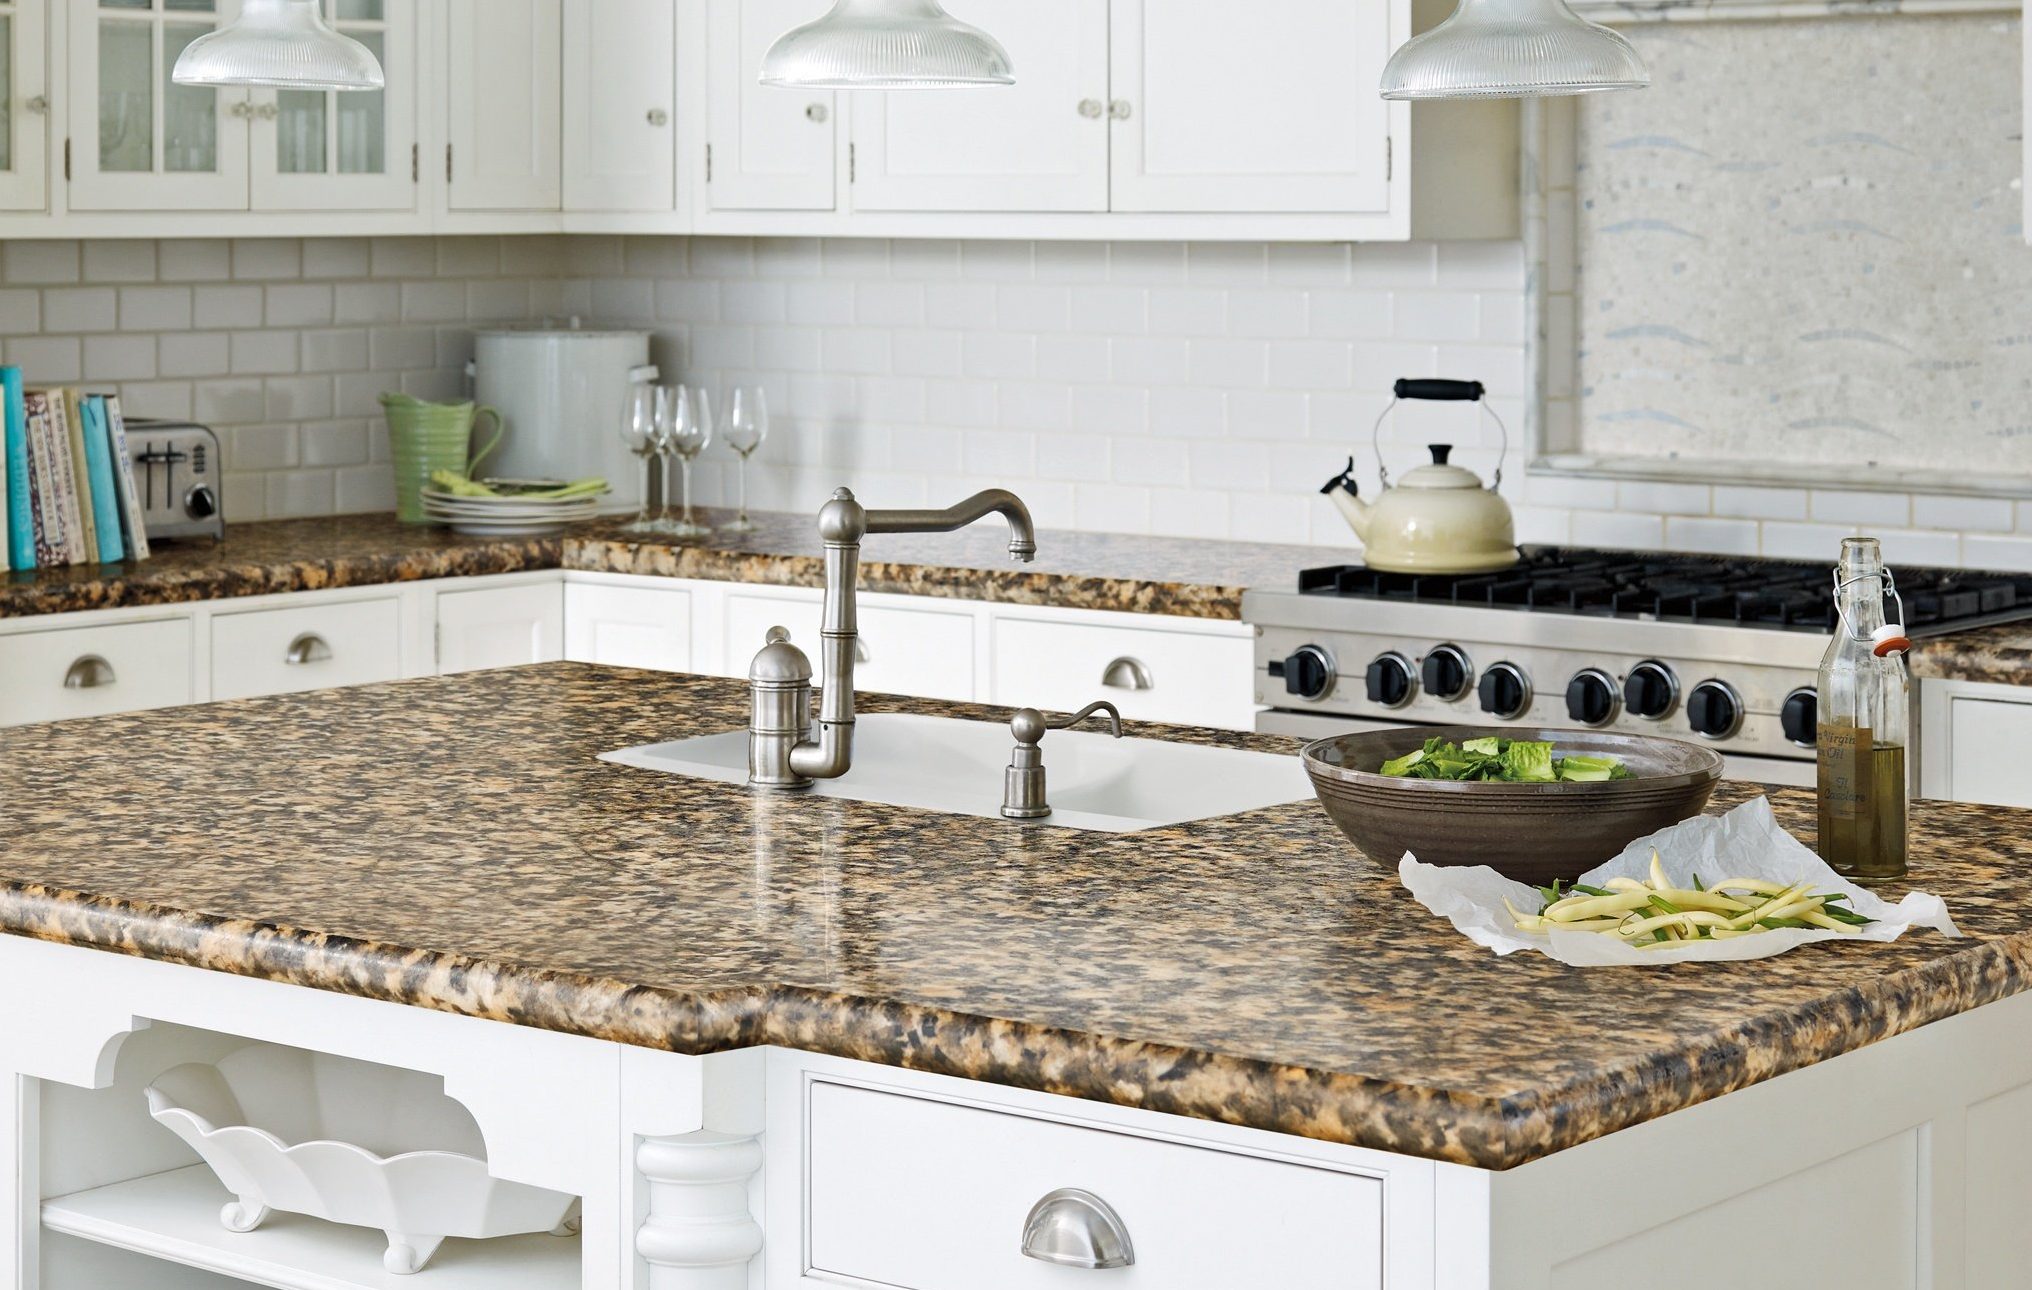 How To Install A Granite Countertop In, Replacing Kitchen Countertops Cost